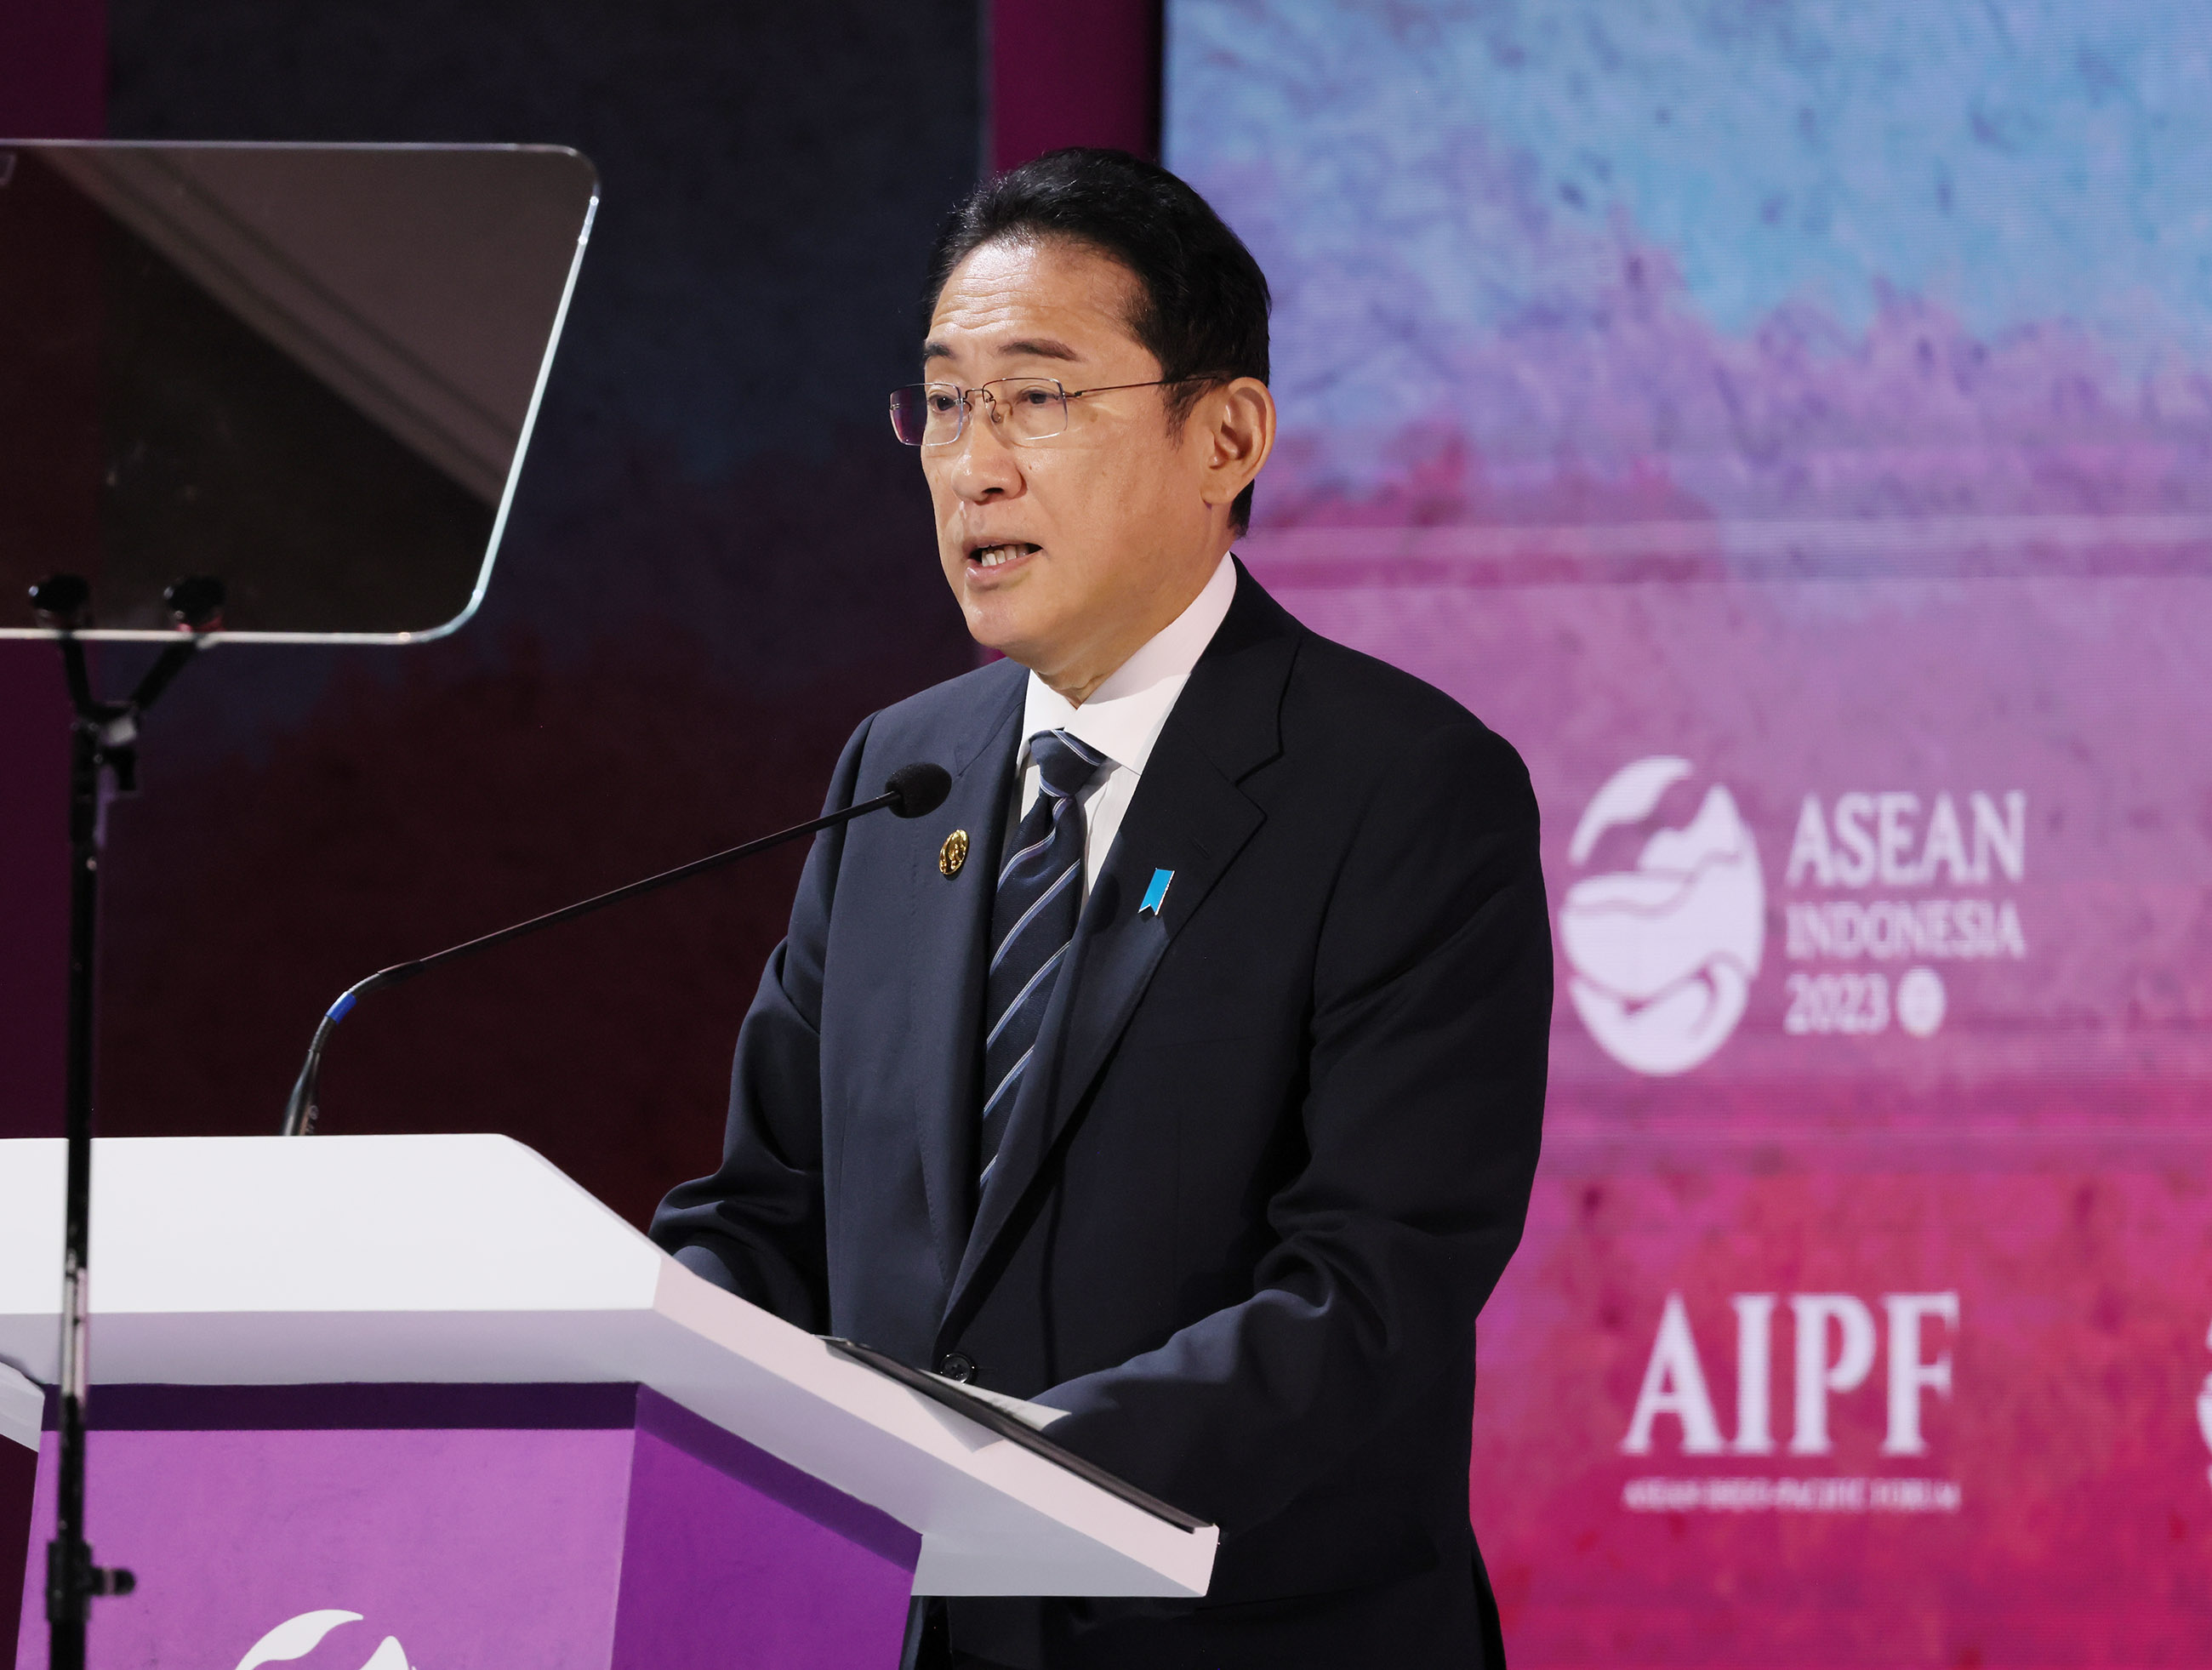 Prime Minister Kishida delivering a speech at the ASEAN-Indo-Pacific Forum (3)